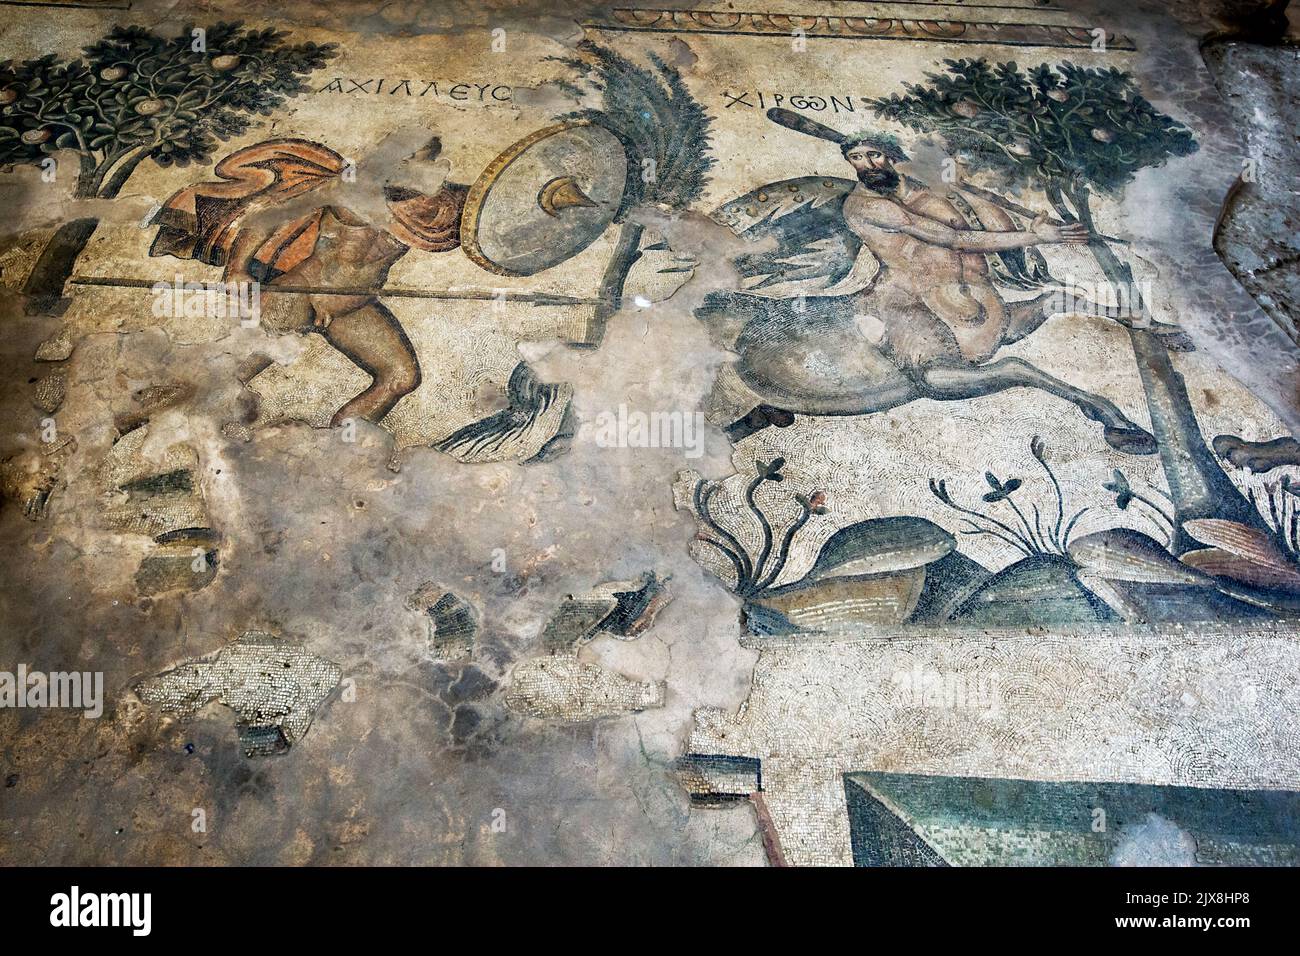 A mosaic depicting a warrior pursuing the centaur Chiron(right) at the Haleplibahce Mosaic Museum at Sanliurfa in Turkey. Stock Photo